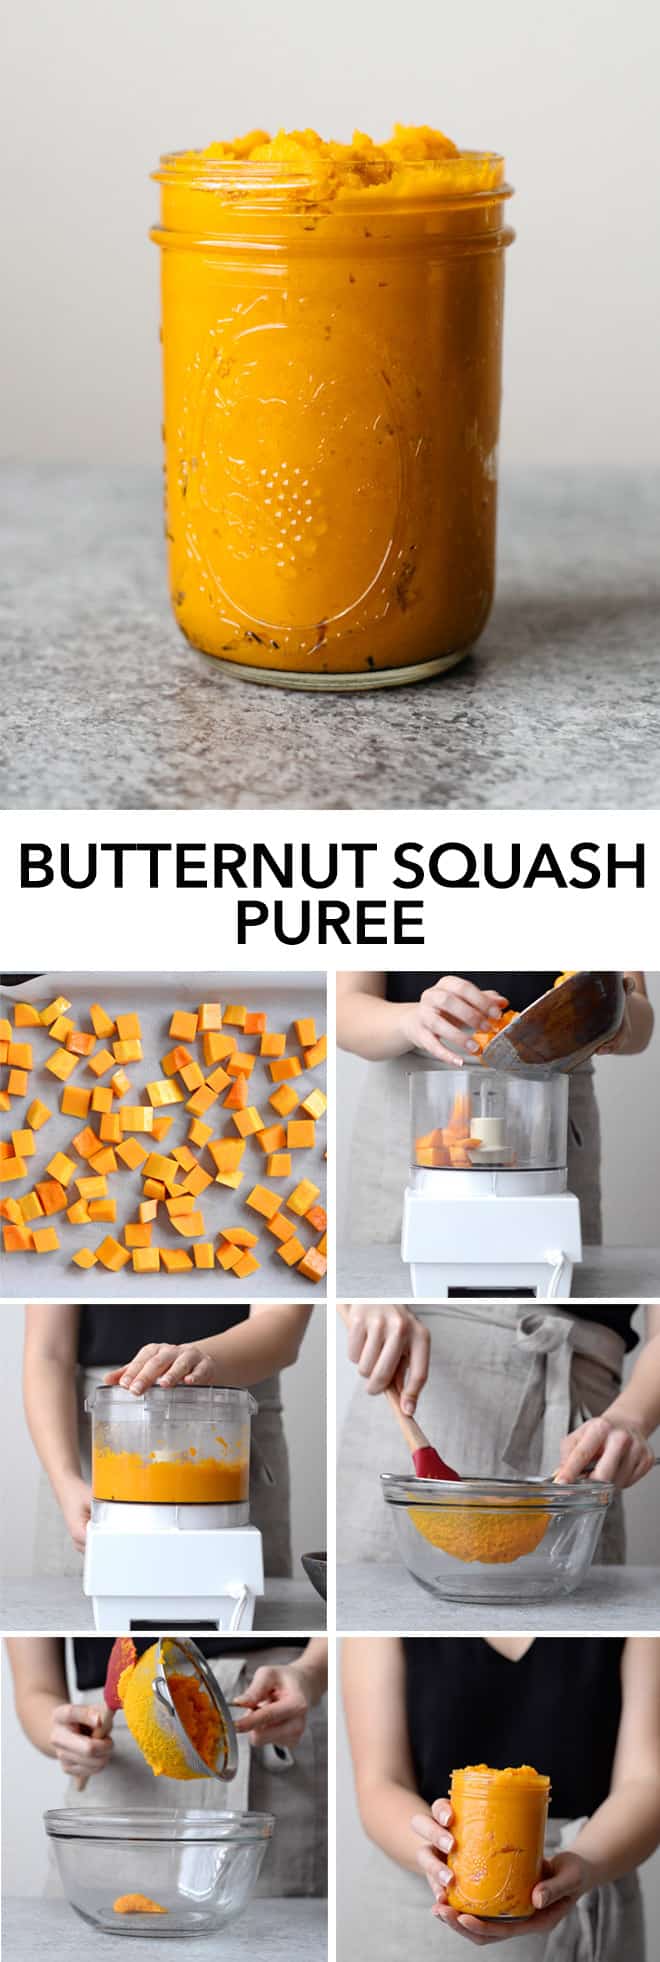 How to Make Butternut Squash Puree - here is a simple way to make butternut squash puree at home! by @healthynibs